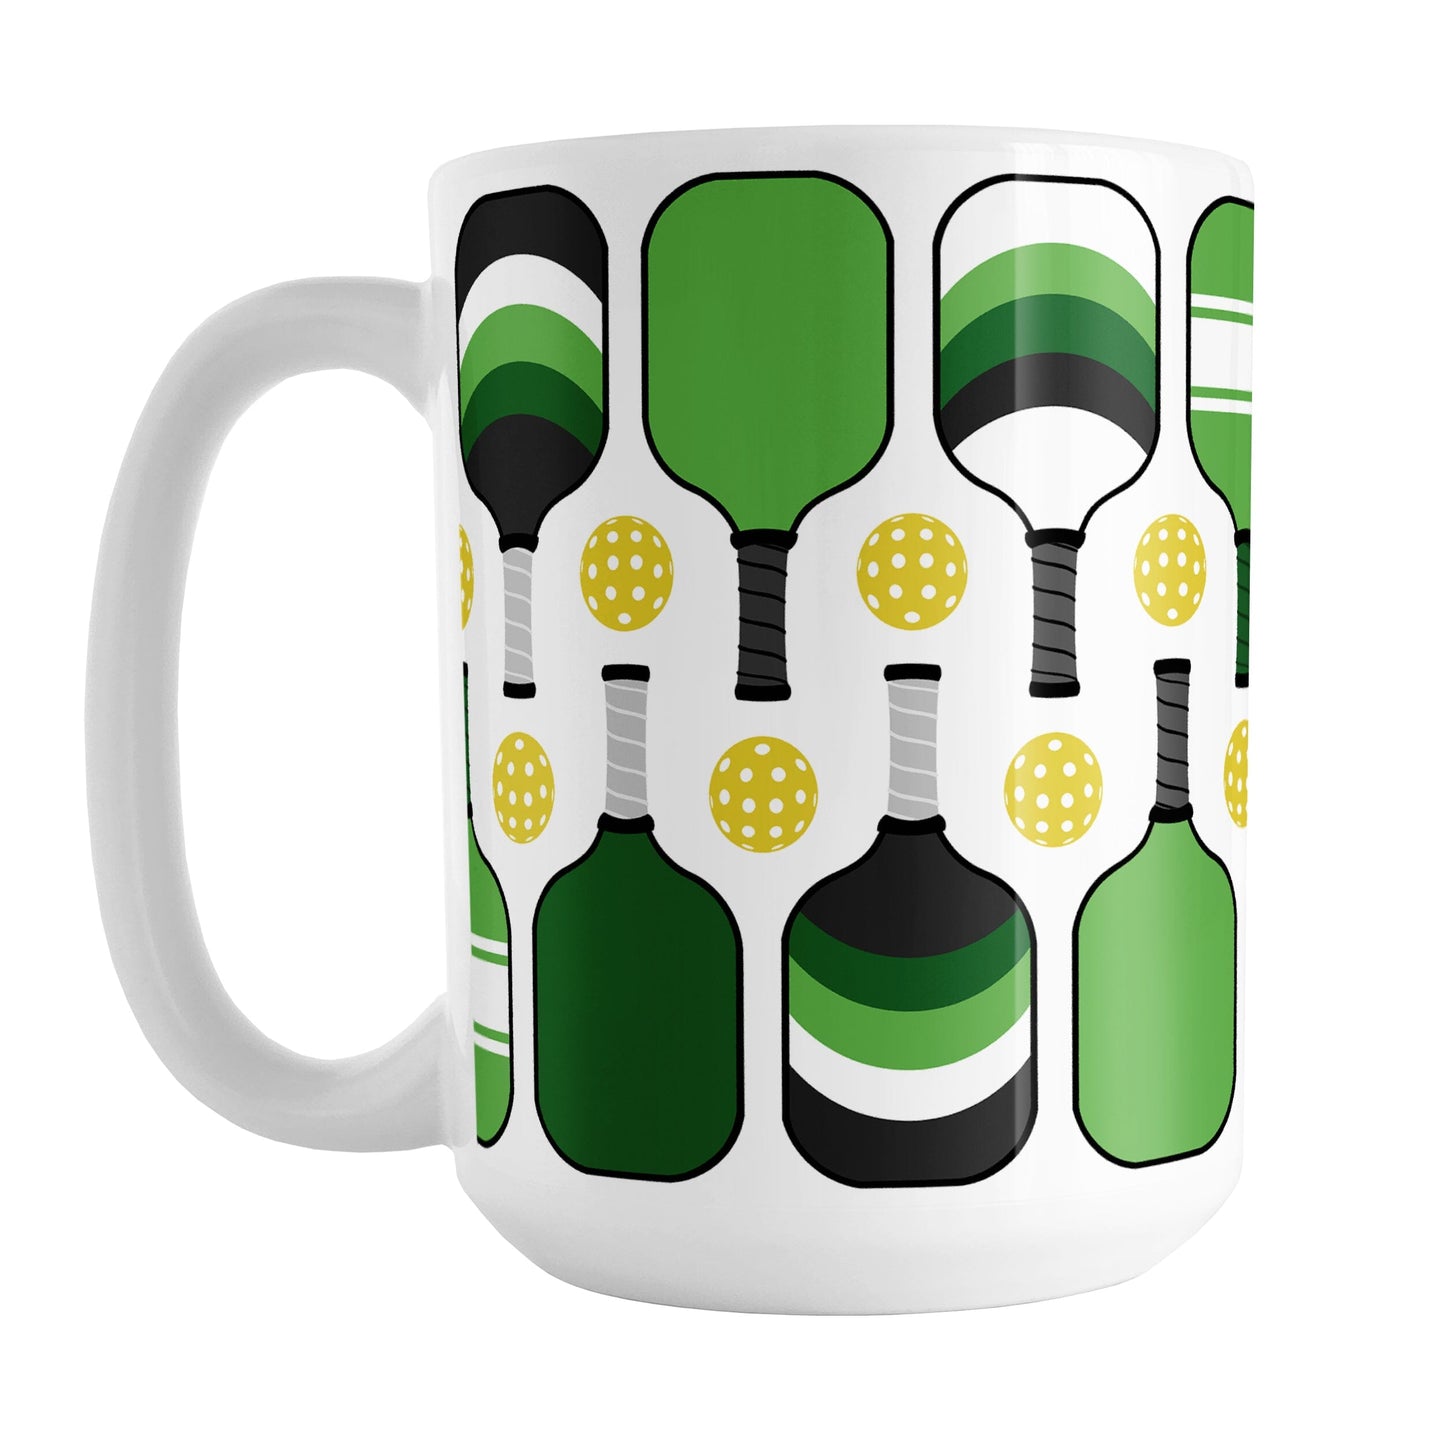 Green Pickleball Mug (15oz) at Amy's Coffee Mugs. A ceramic coffee mug designed with modern green pickleball paddles and yellow balls in a pattern that wraps around the mug up to the handle.